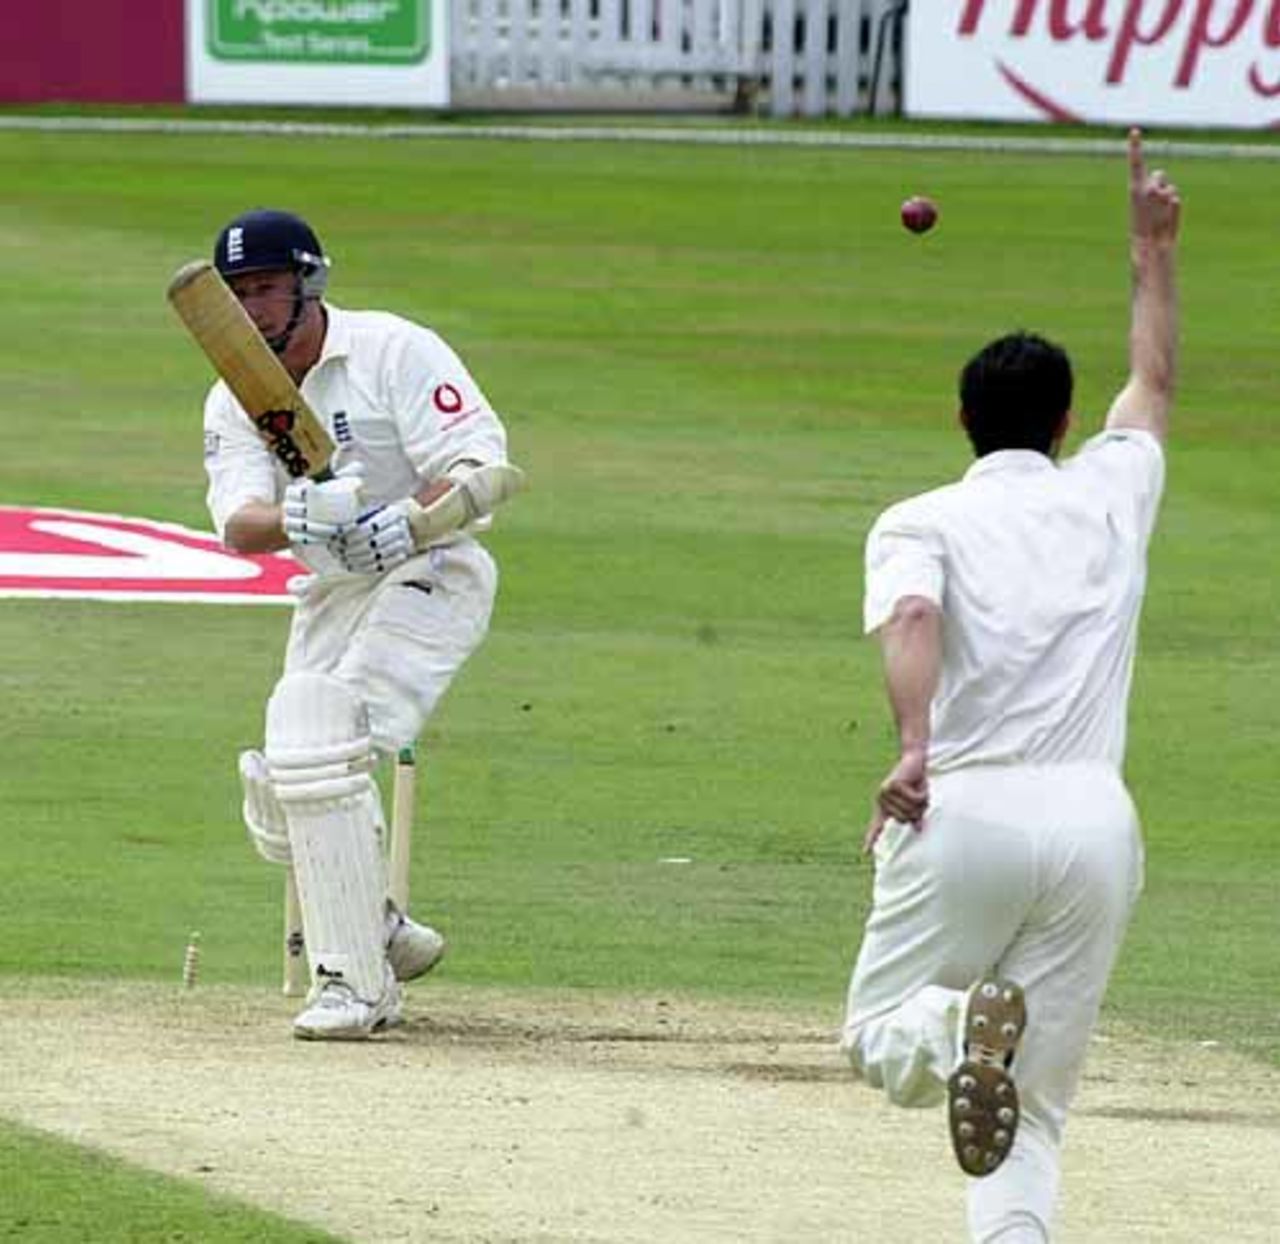 Robert Croft is bowled  by Gillespie for 0, England v Australia, The Ashes 3rd npower Test, Nottingham, 02-06 Aug 2001